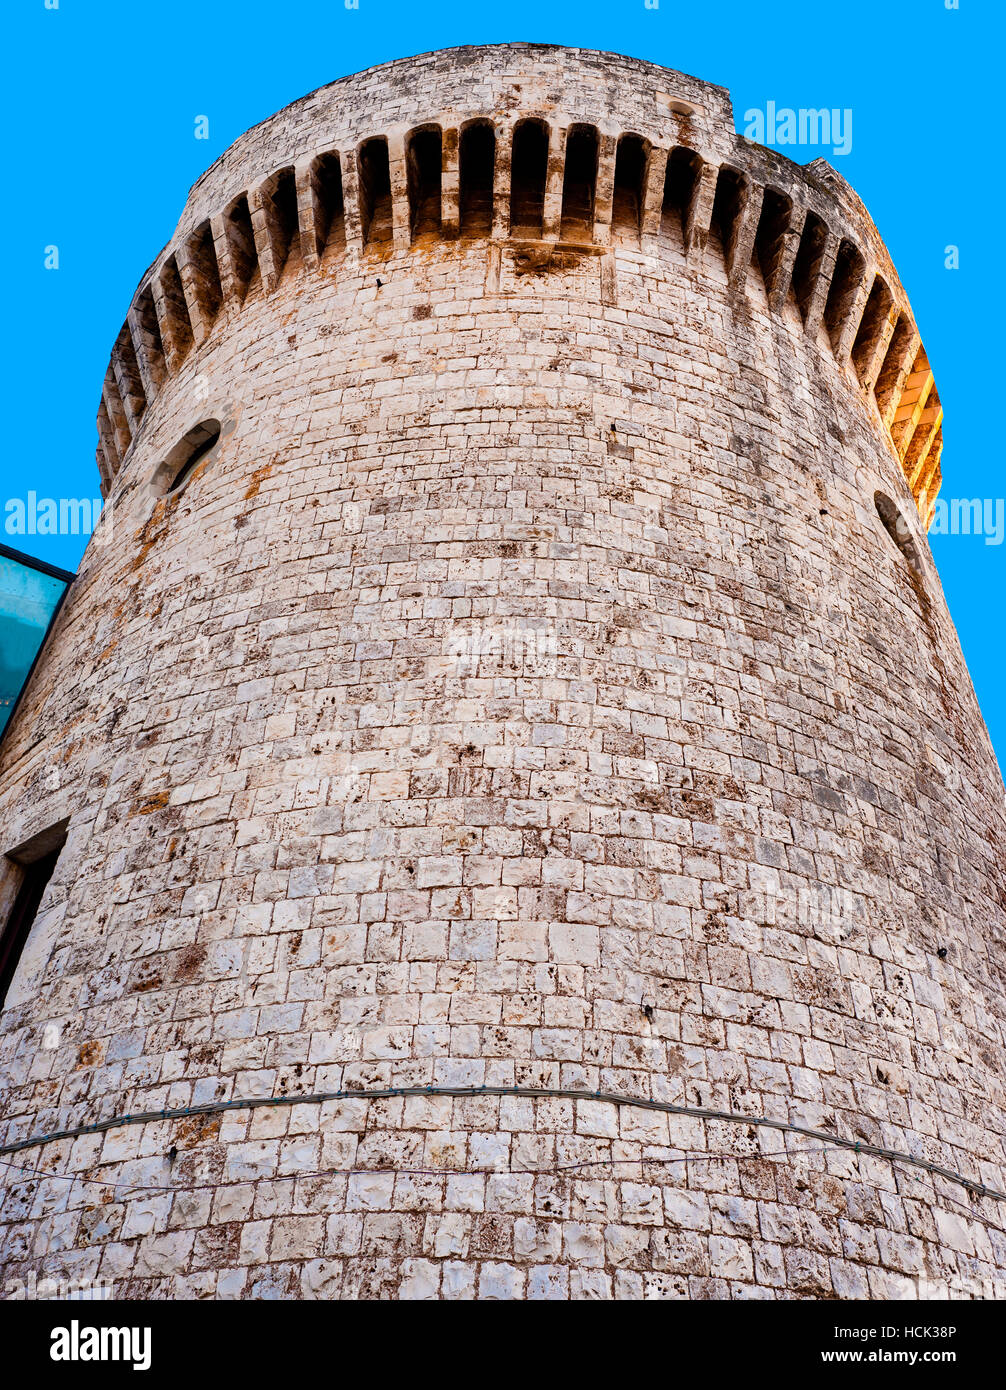 detail Norman tower of the castle of Conversano, Puglia - Italy Stock Photo